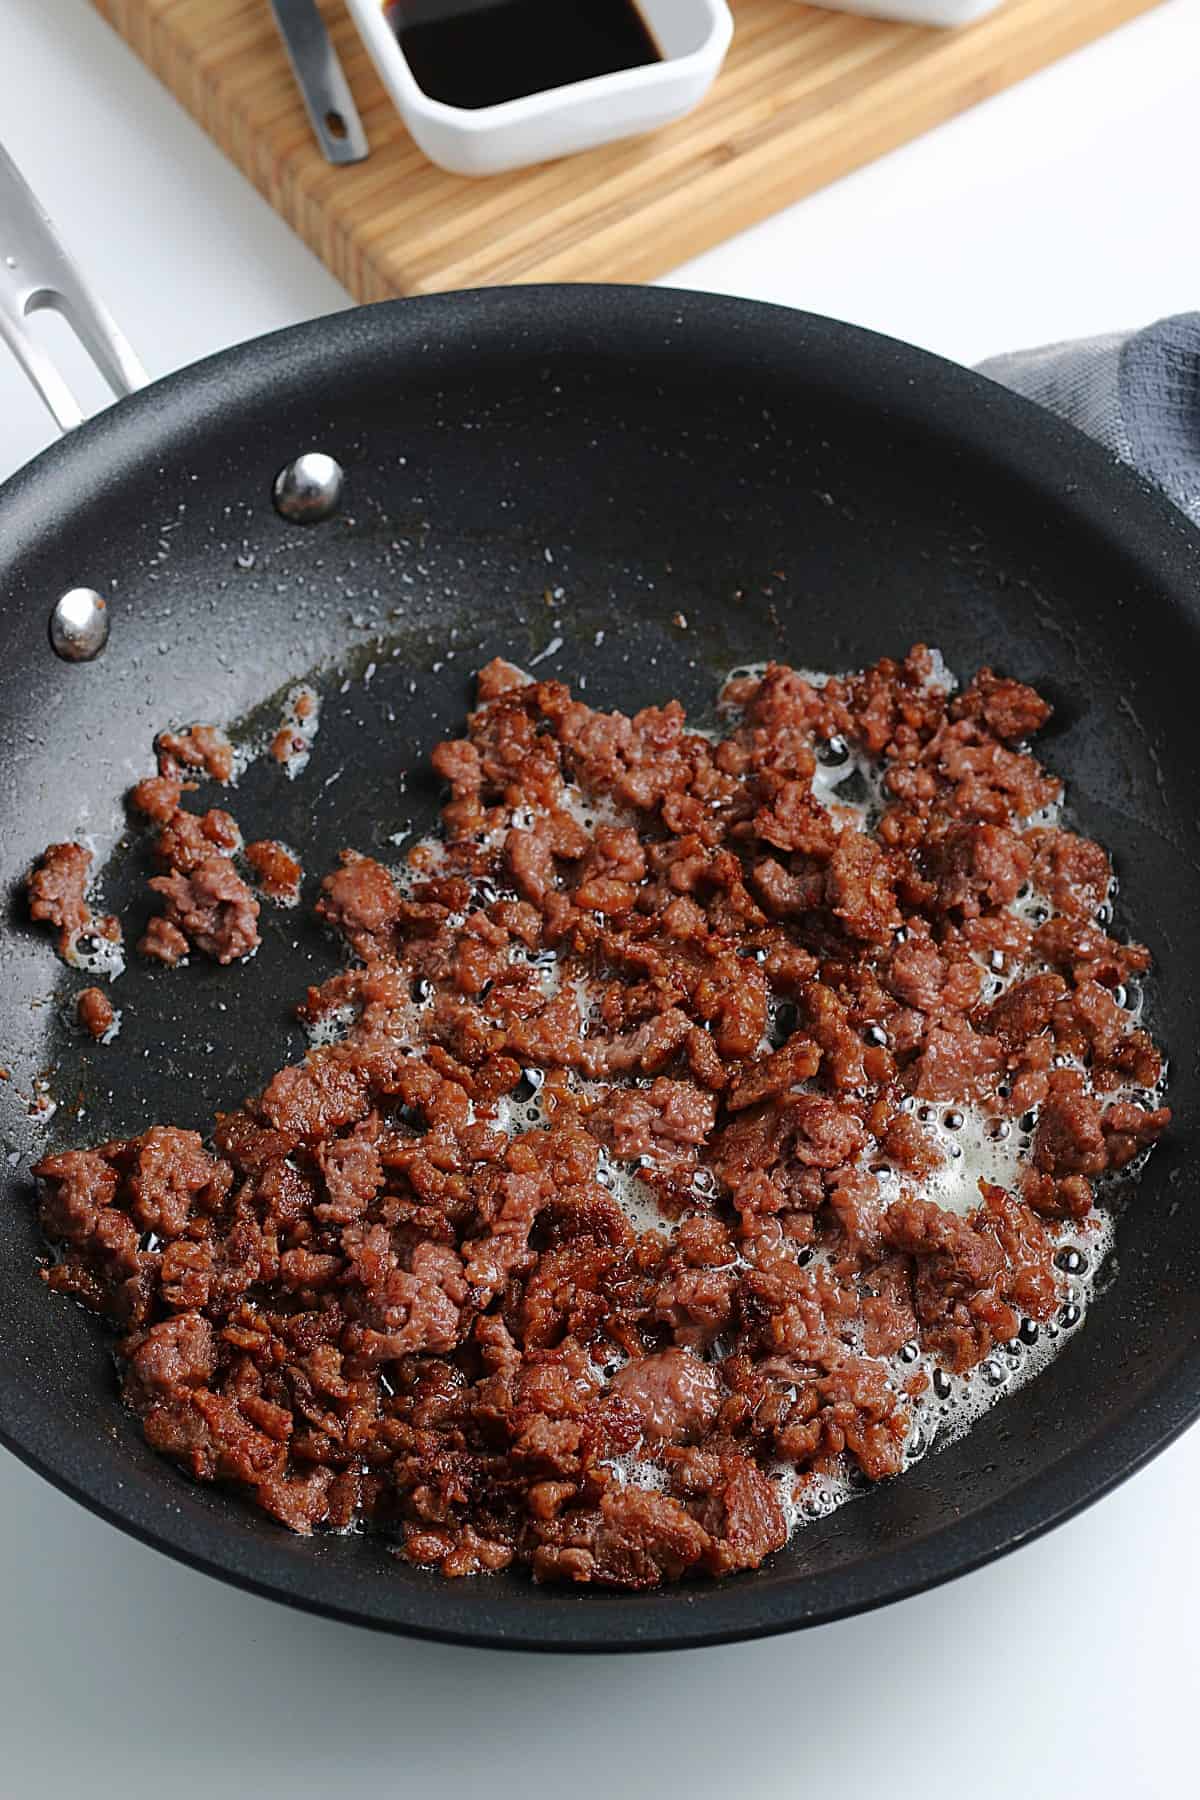 Browning plant based meat in a skillet.